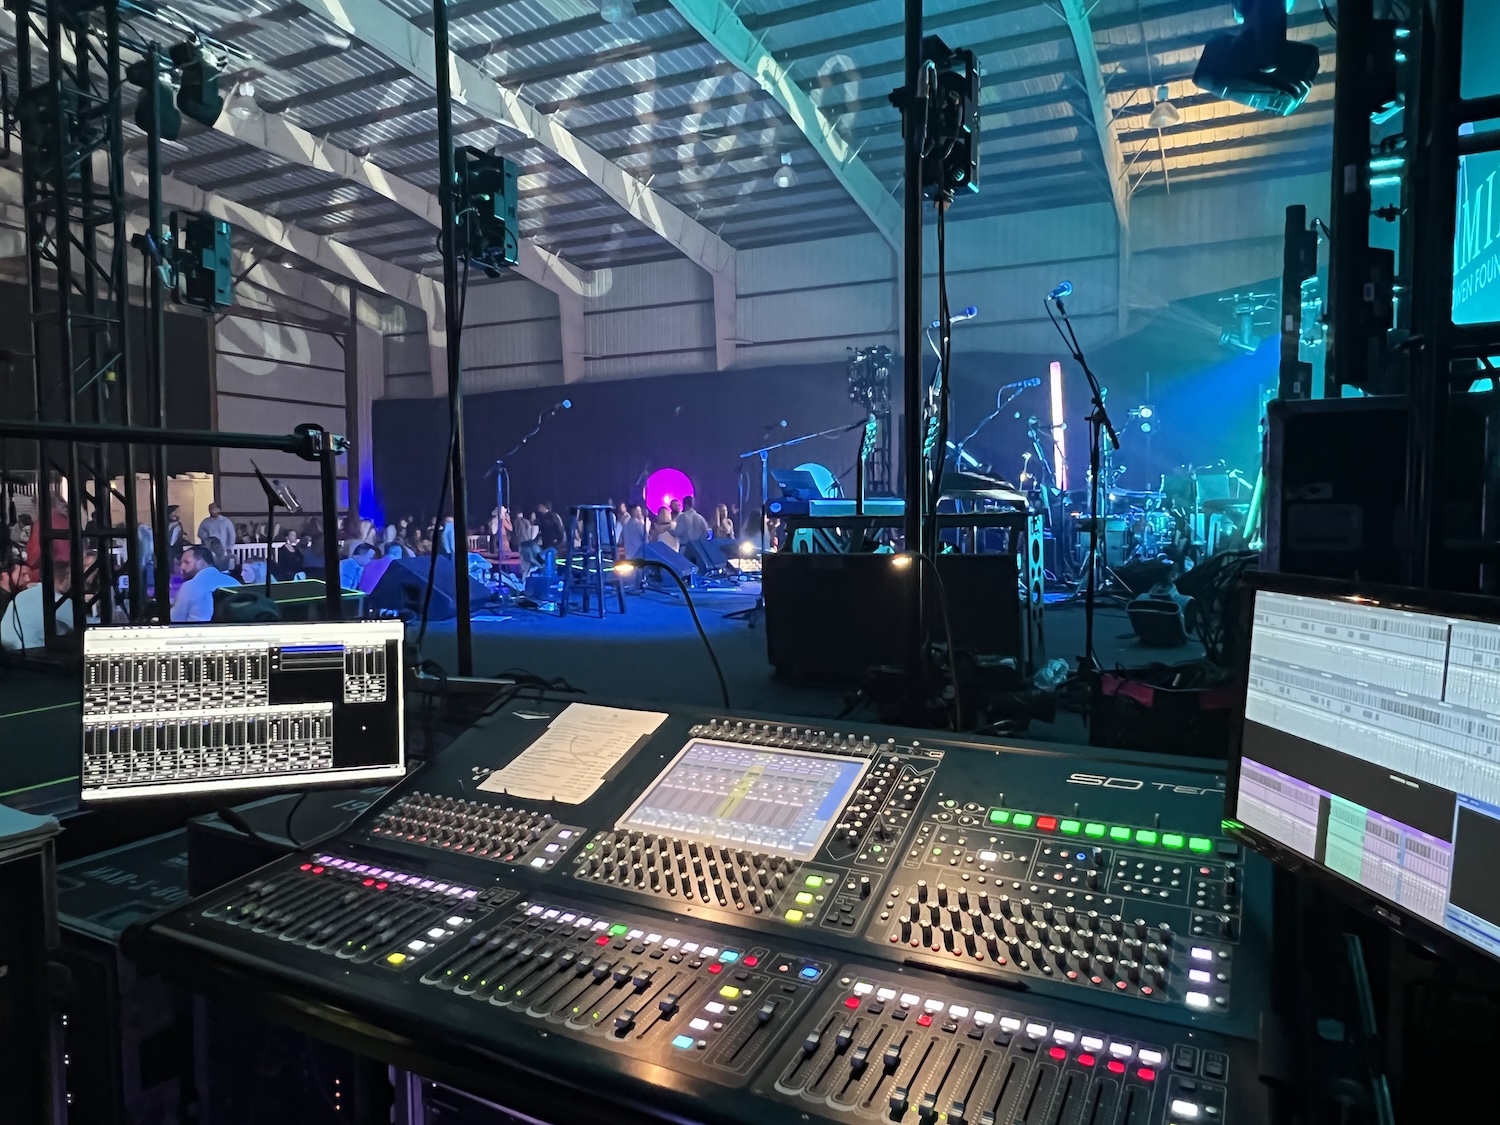 A view over a sound mixing console at a live performance space with musical instruments set up on stage and an audience in the background.